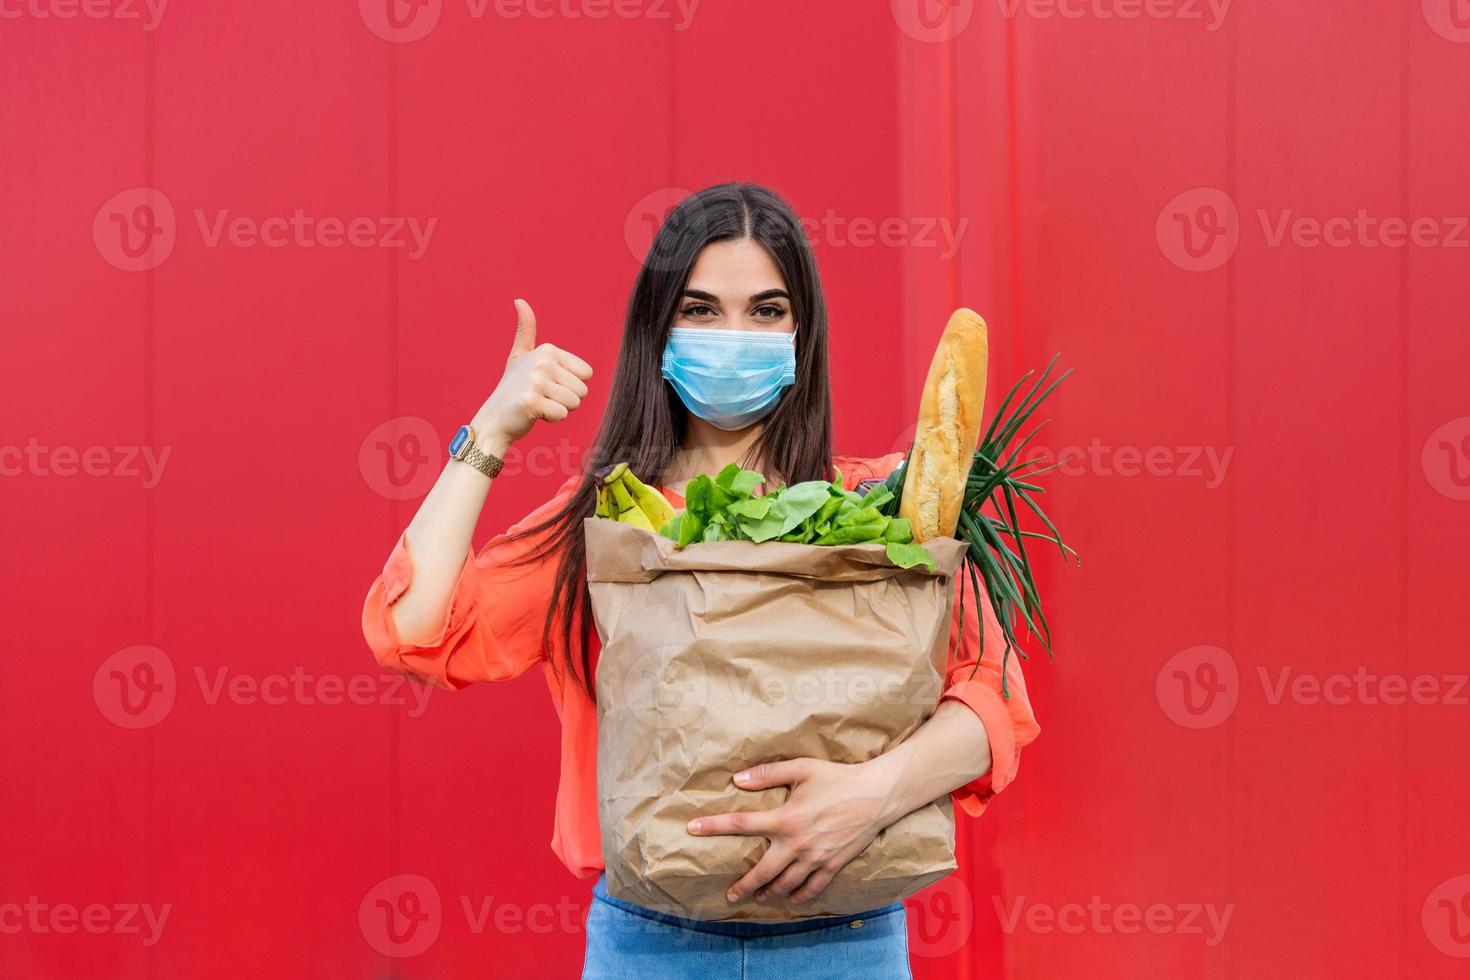 Pretty girl with medical mask holding bag with groceries and looking at camera with thumb up. Woman holding heavy bag with groceries. Groceries shopping during Covid 19, coronavirus pandemic photo